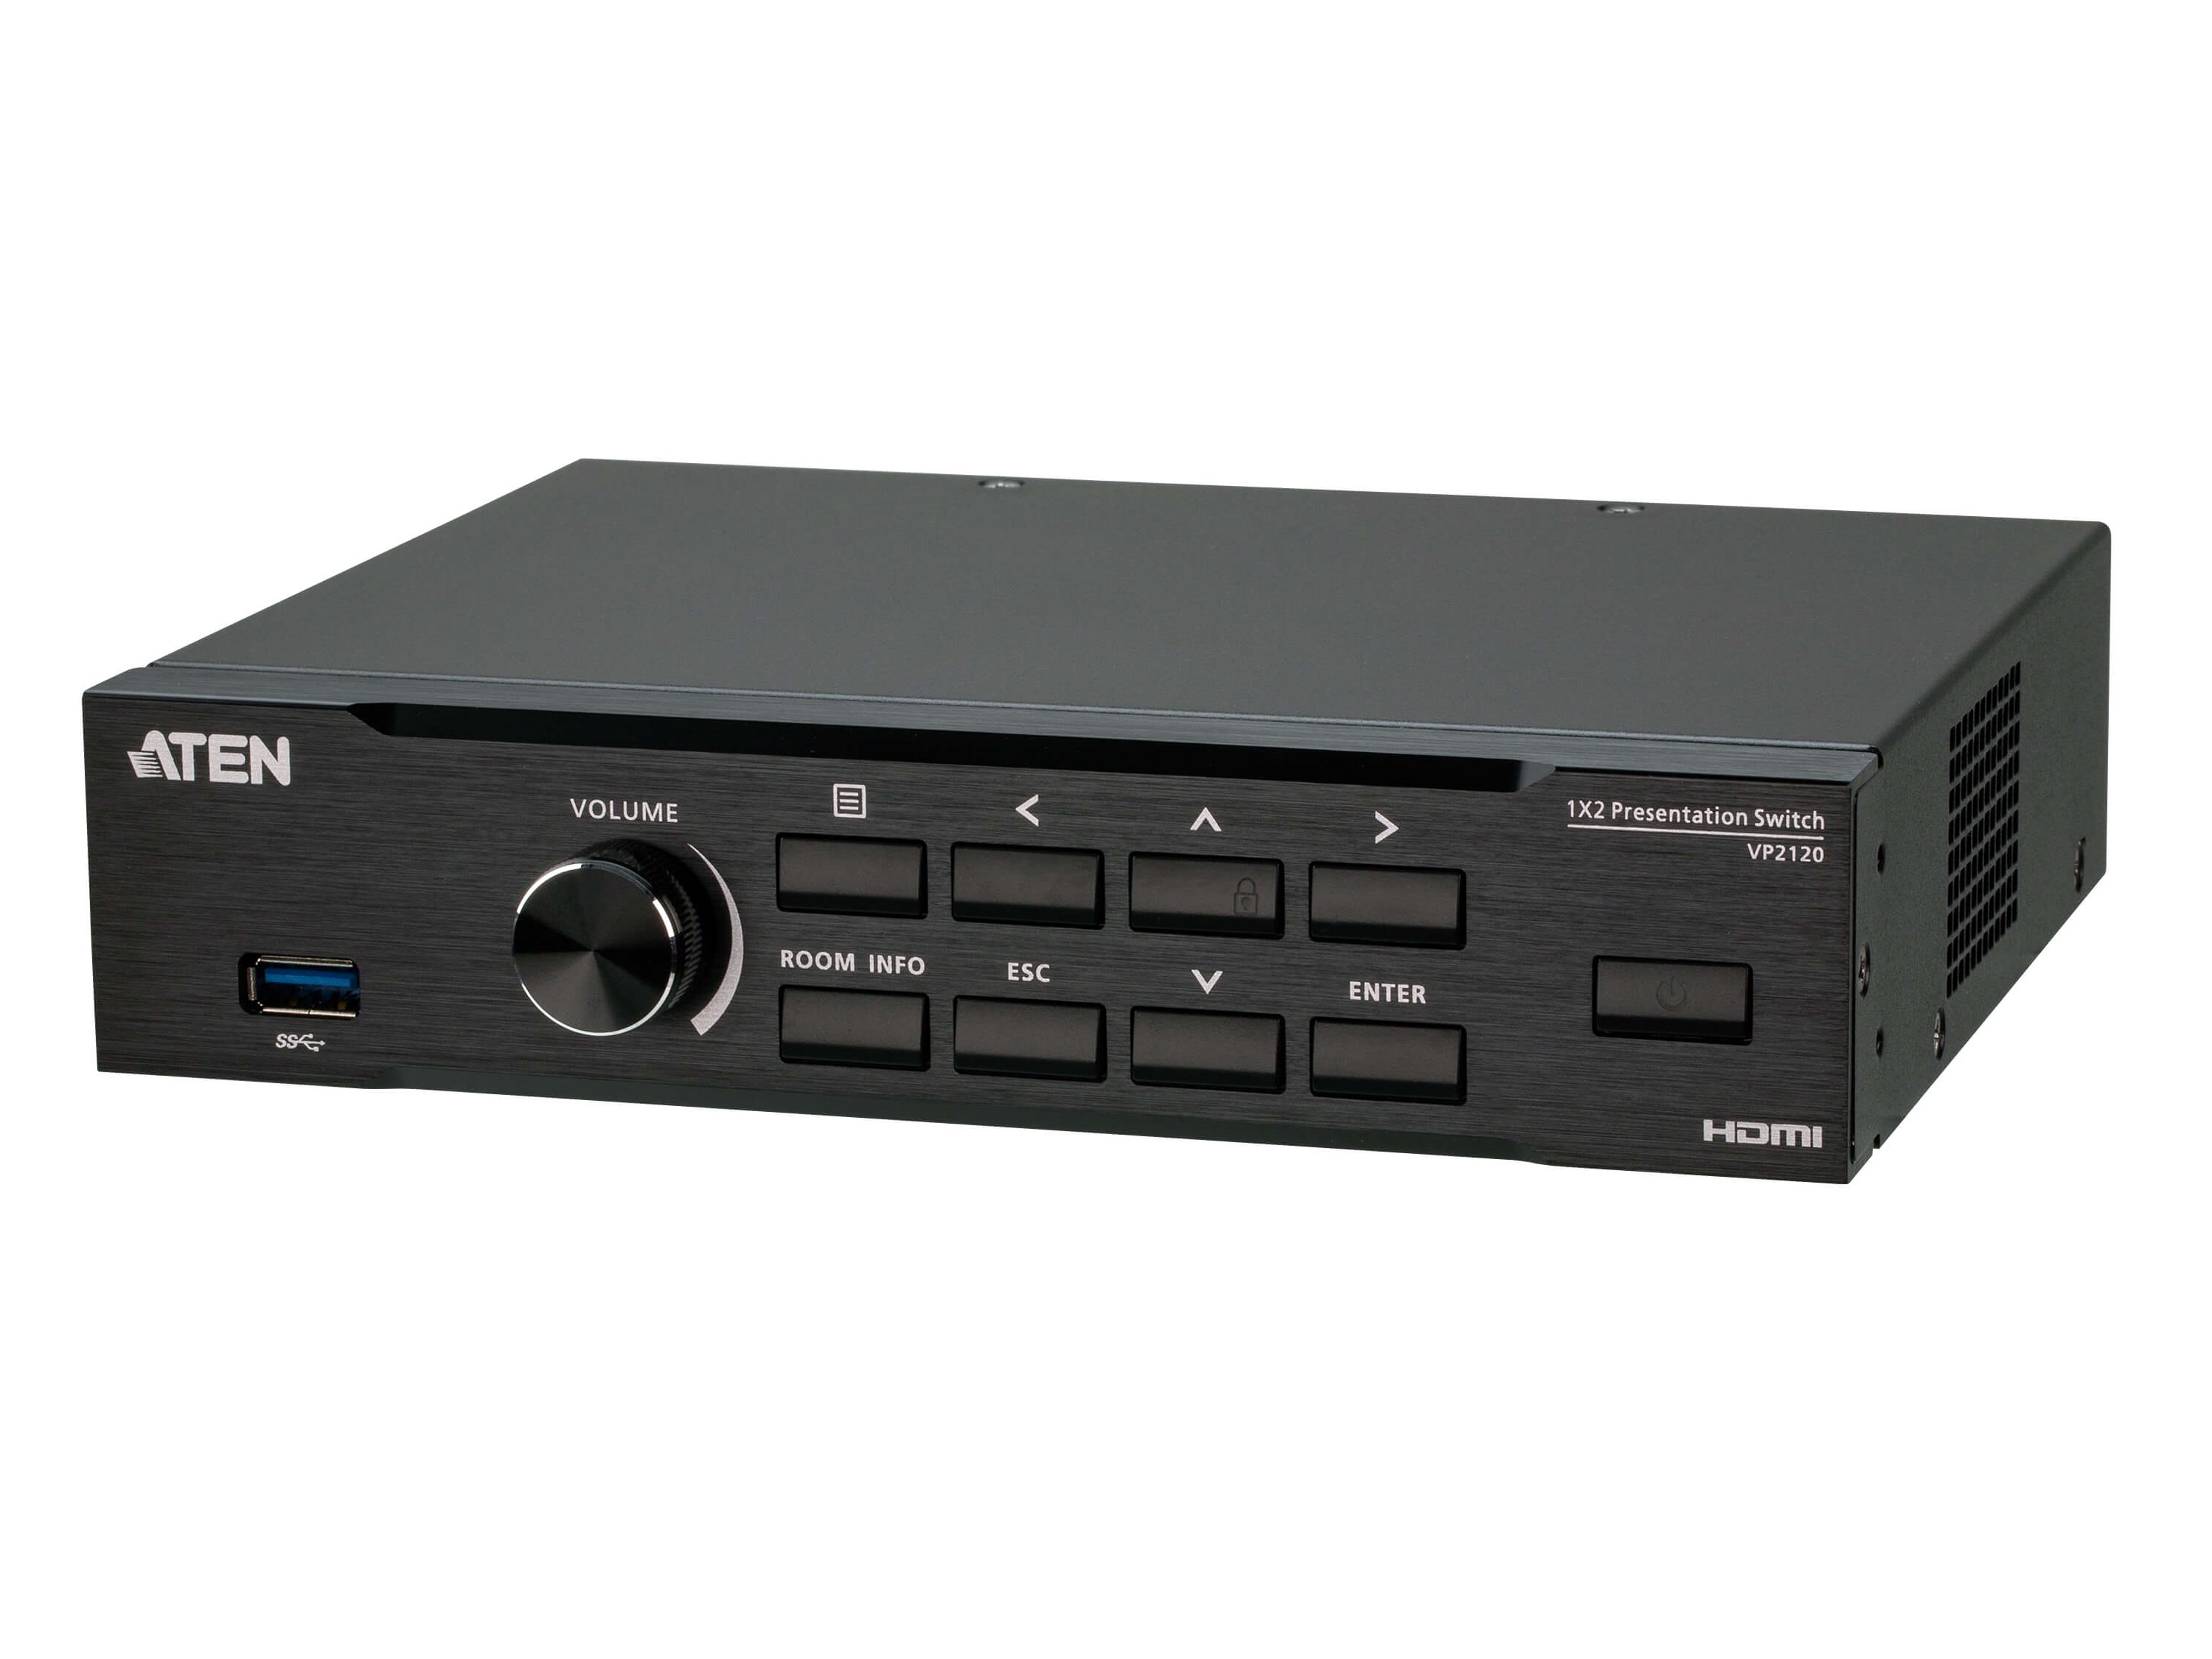 Aten VP2120 Seamless Presentation Switch with Quad View Multistreaming